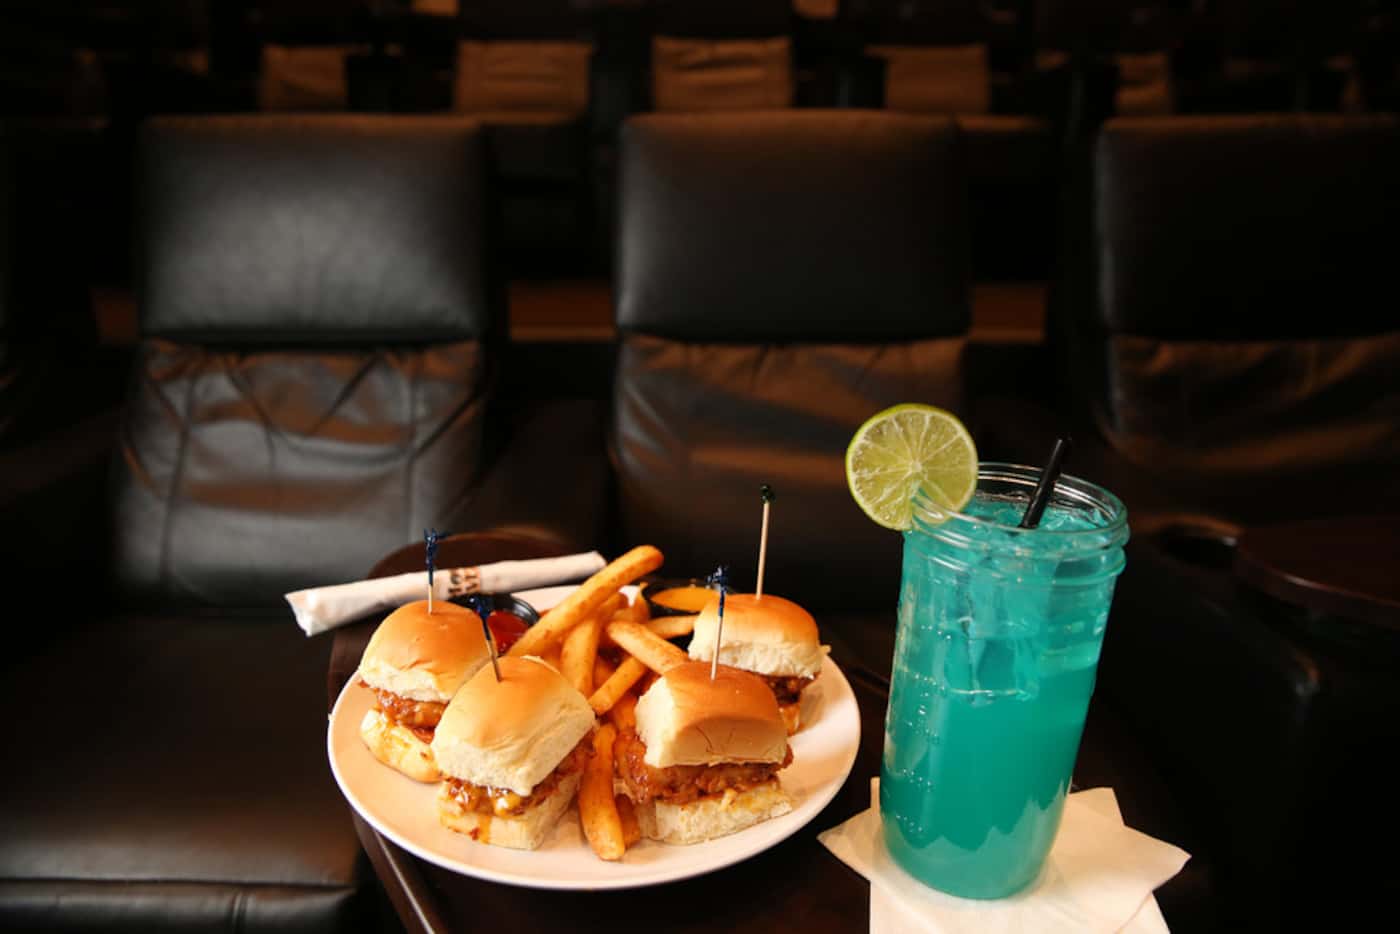 The crispy chipotle sliders and the blue thing margarita are on the menu at Movie Tavern in...